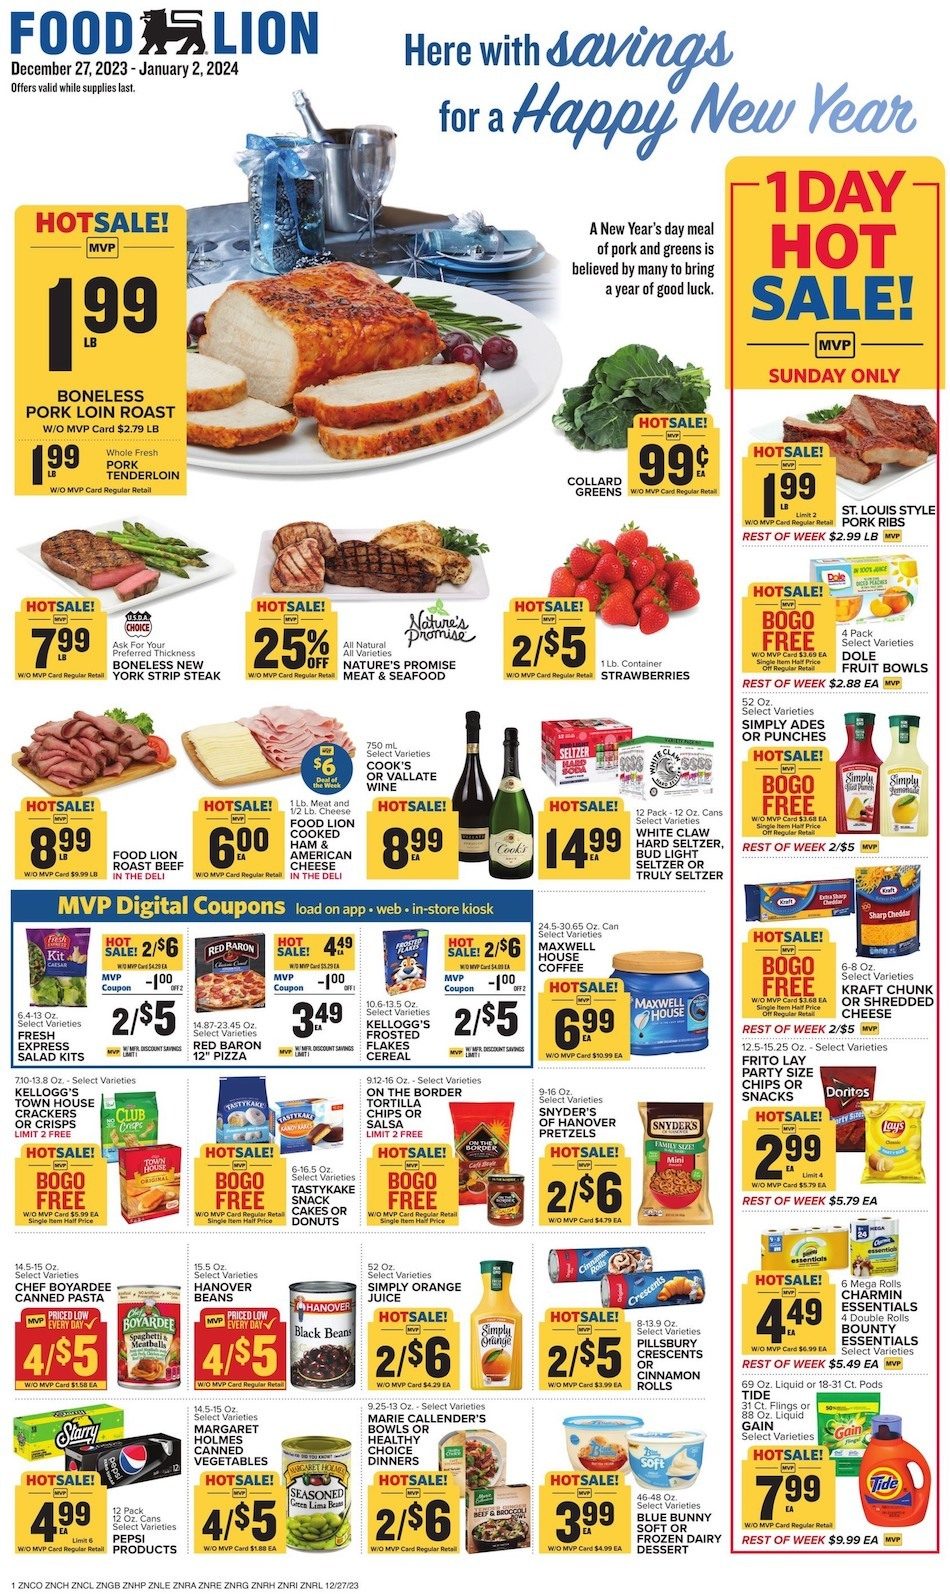 Food Lion Weekly Ad 27th December – 2nd January 2024 Page 1